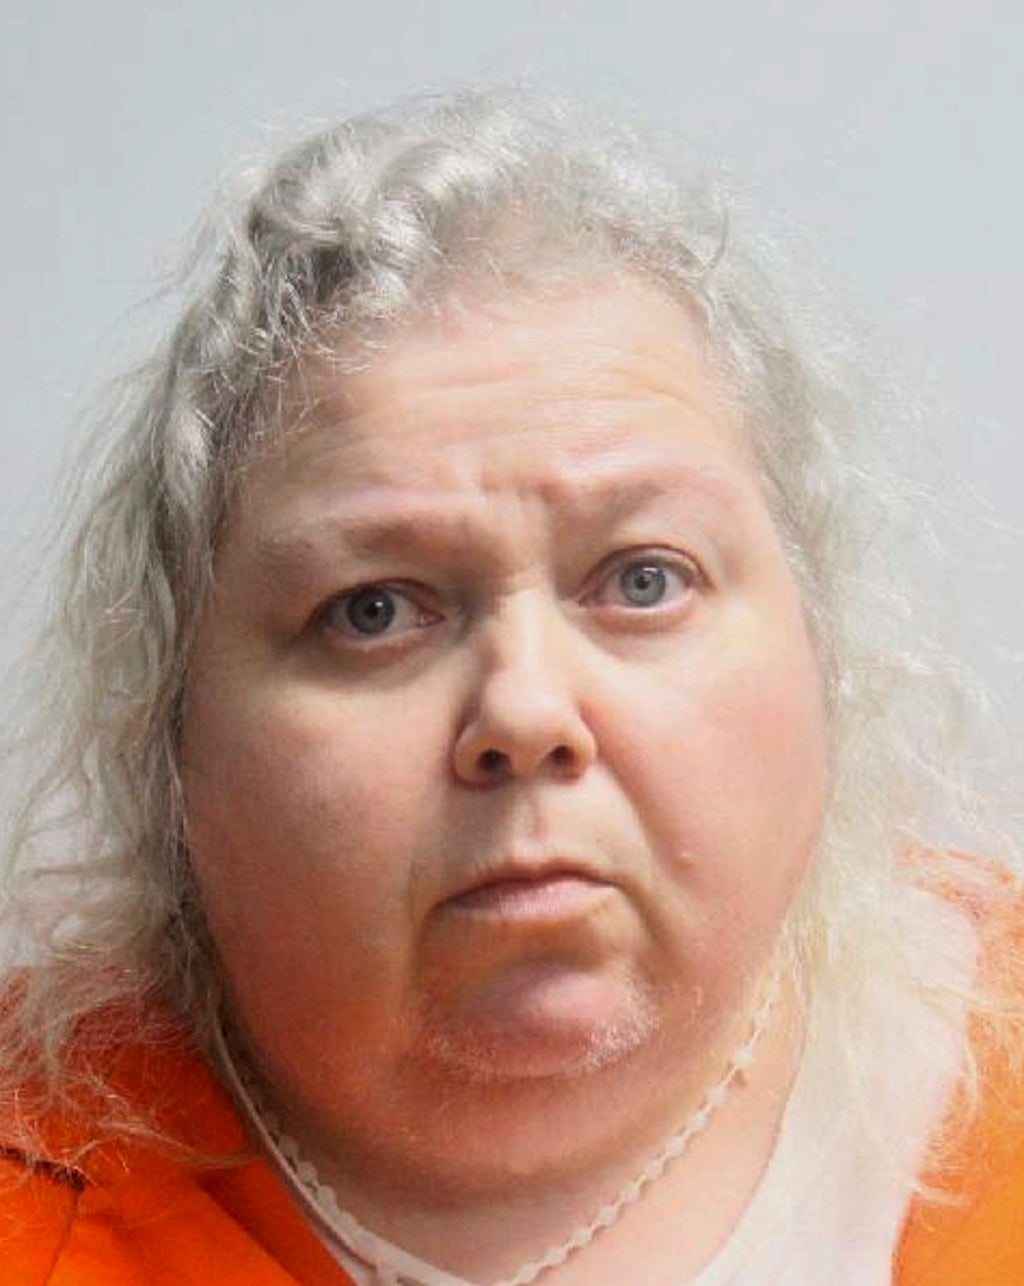 Woman reaches plea deal after daughter found dead amid filth